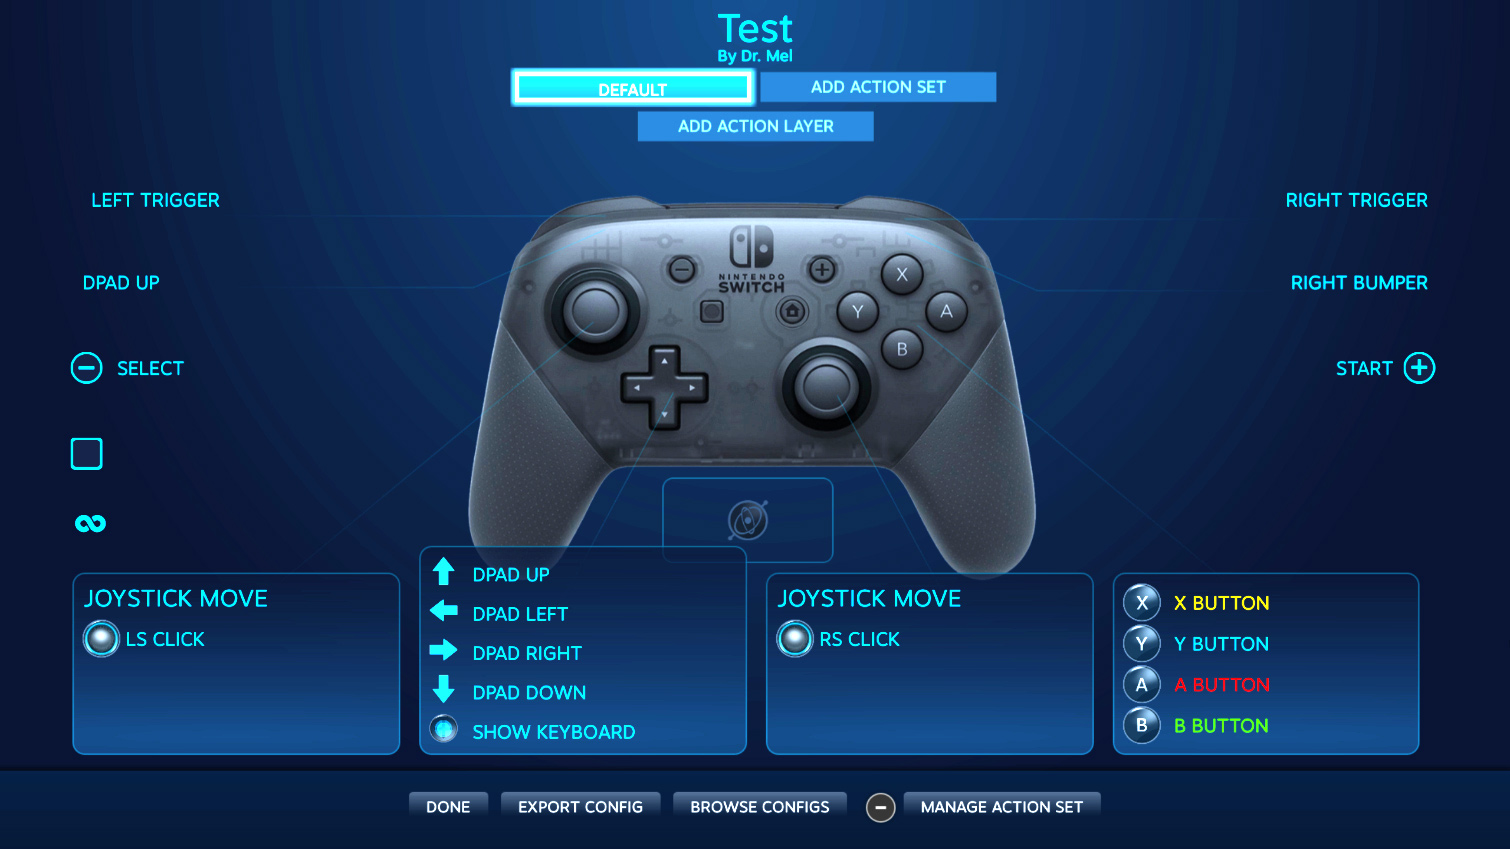 x360ce switch pro controller